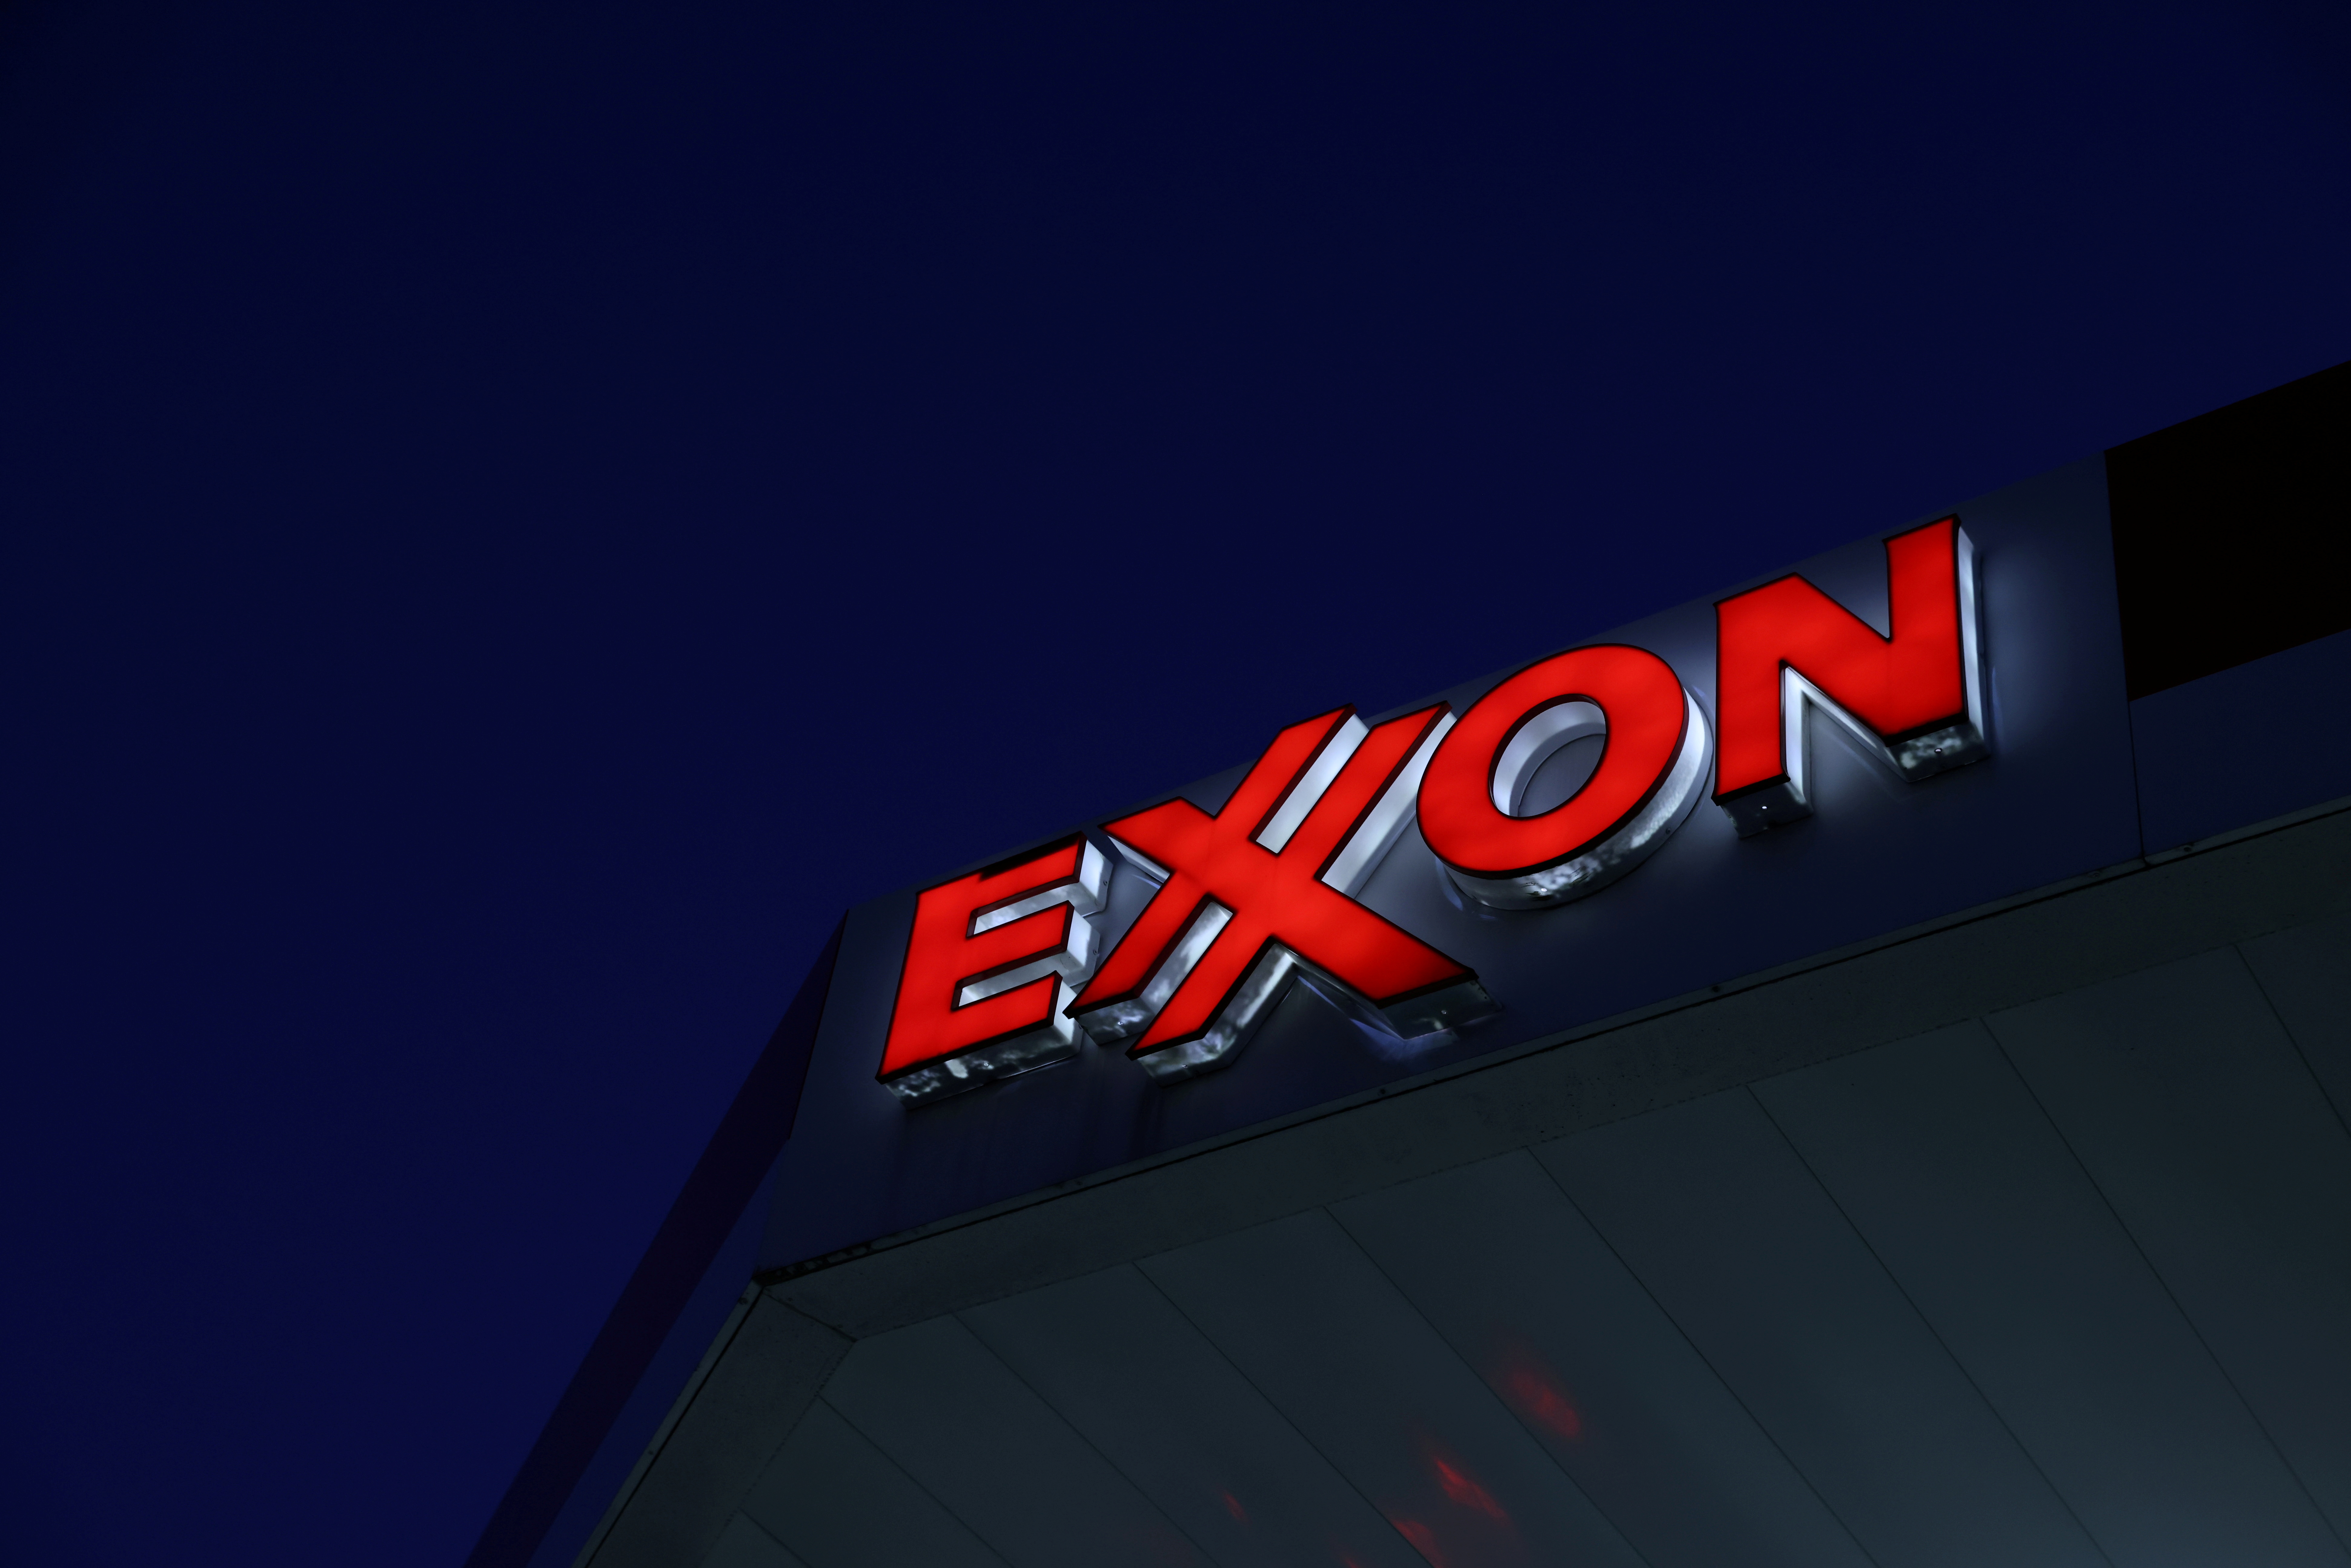 Signage is seen at an Exxon gas station in Brooklyn, New York City